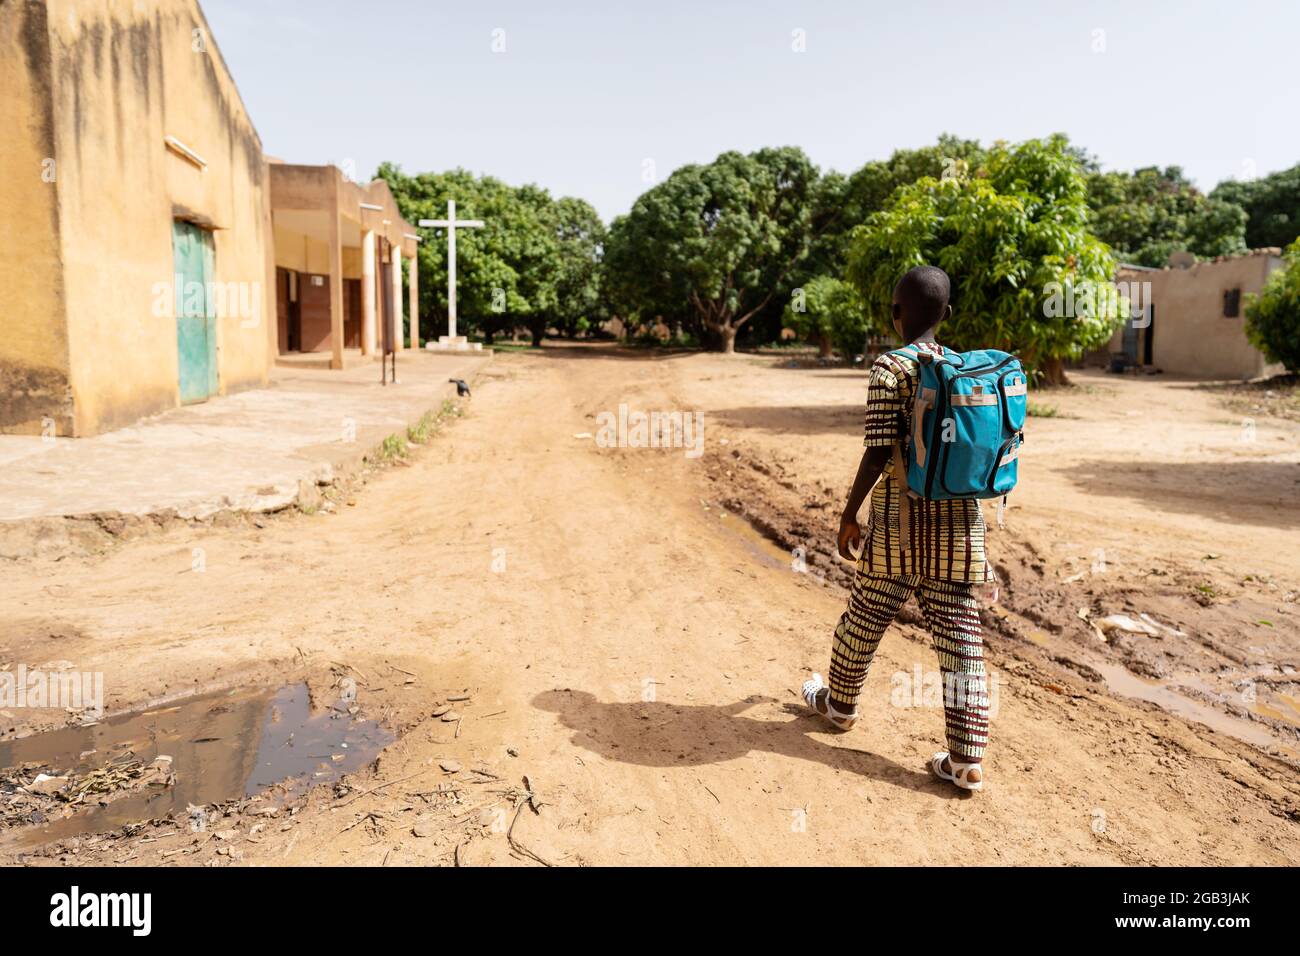 In this image, a lonely well dressed black boy with blue backpack on the way to sunday school or mass in a deserted Christian village in Africa Stock Photo